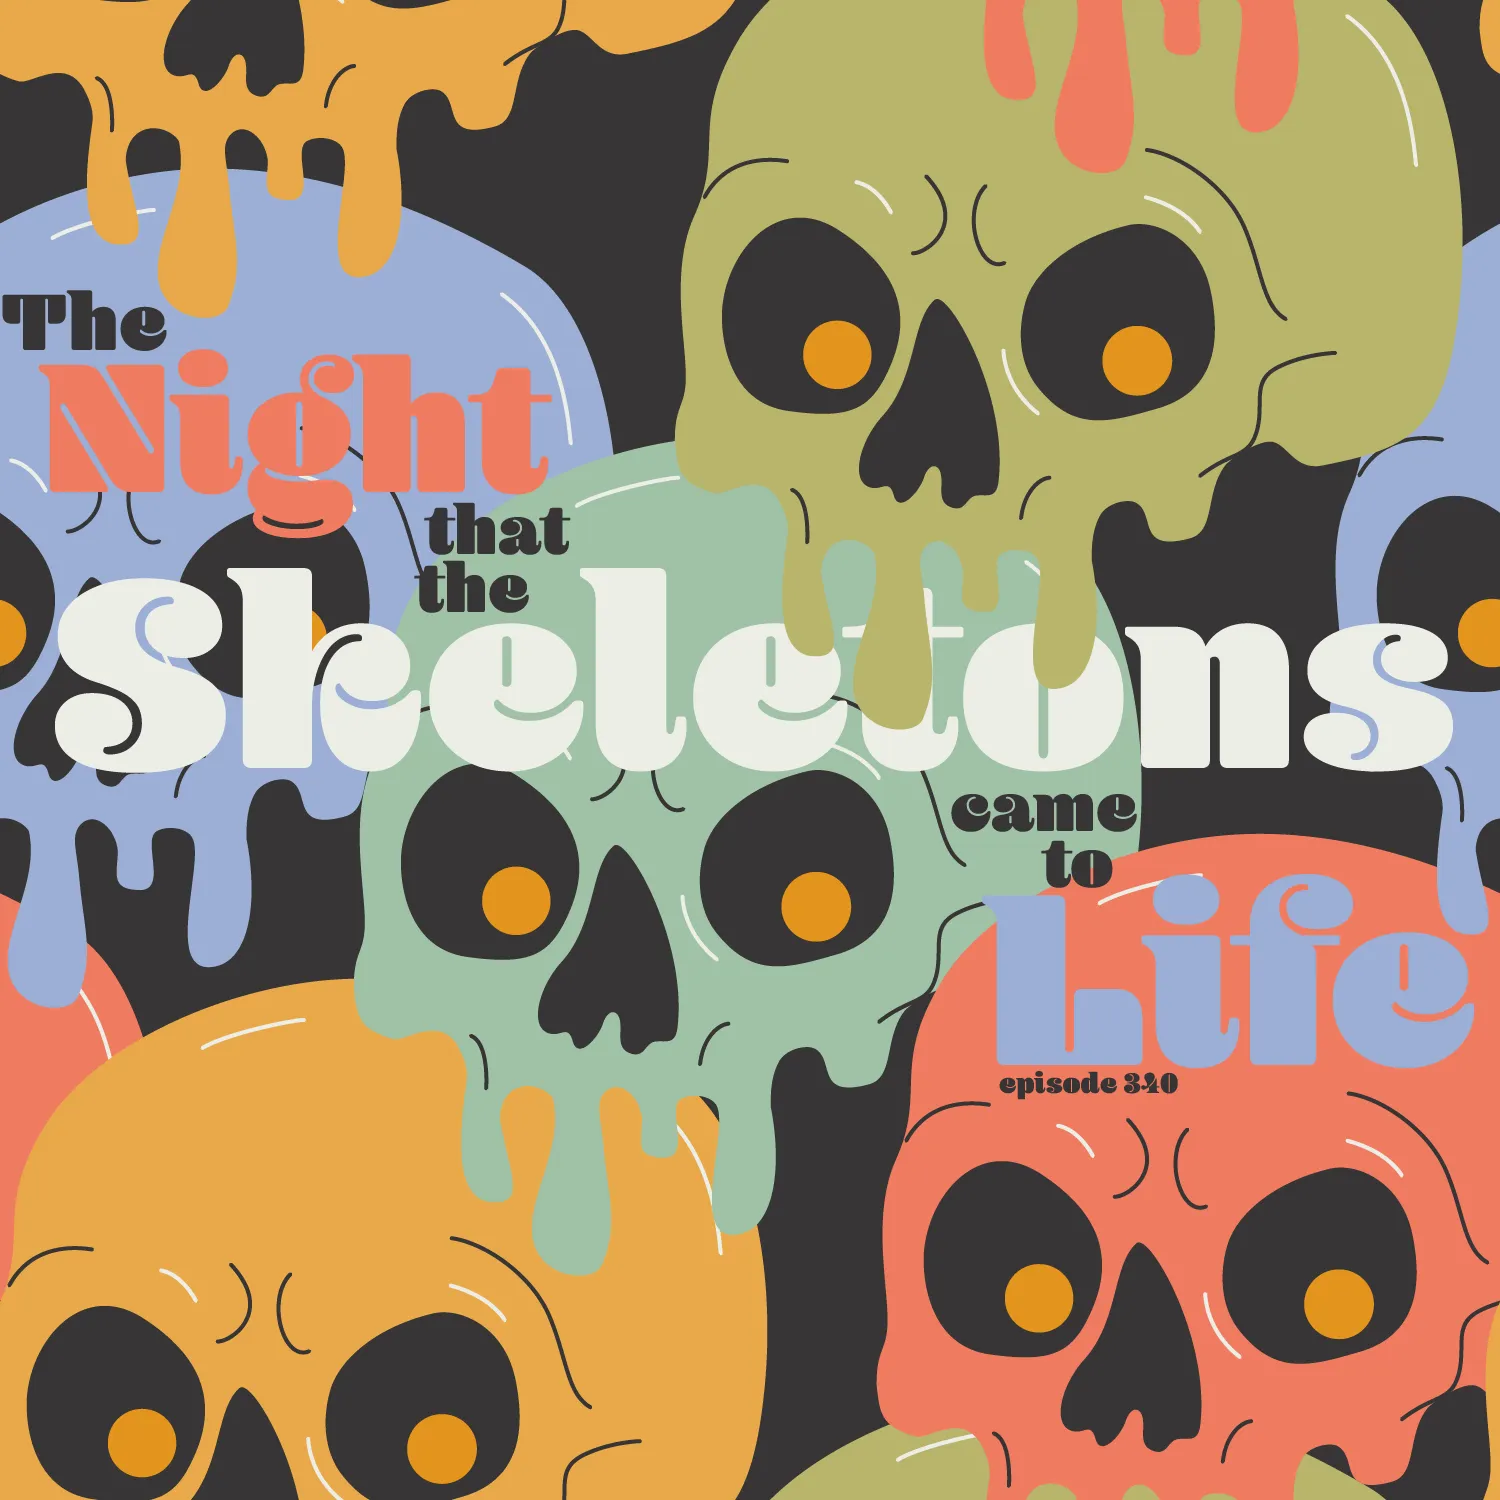 A colorful and whimsical illustration showing a cluster of cartoonish skulls in shades of yellow, green, blue, and red, with a drippy effect as if melting. The overlaid text "The Night that the Skeletons came to Life" in a mix of opaque and translucent letters adds a playful yet eerie touch to the image. Below, "episode 340" suggests this is part of a series. The background features a dark grey tone with additional melting shapes, enhancing the spooky, fun theme of the artwork.